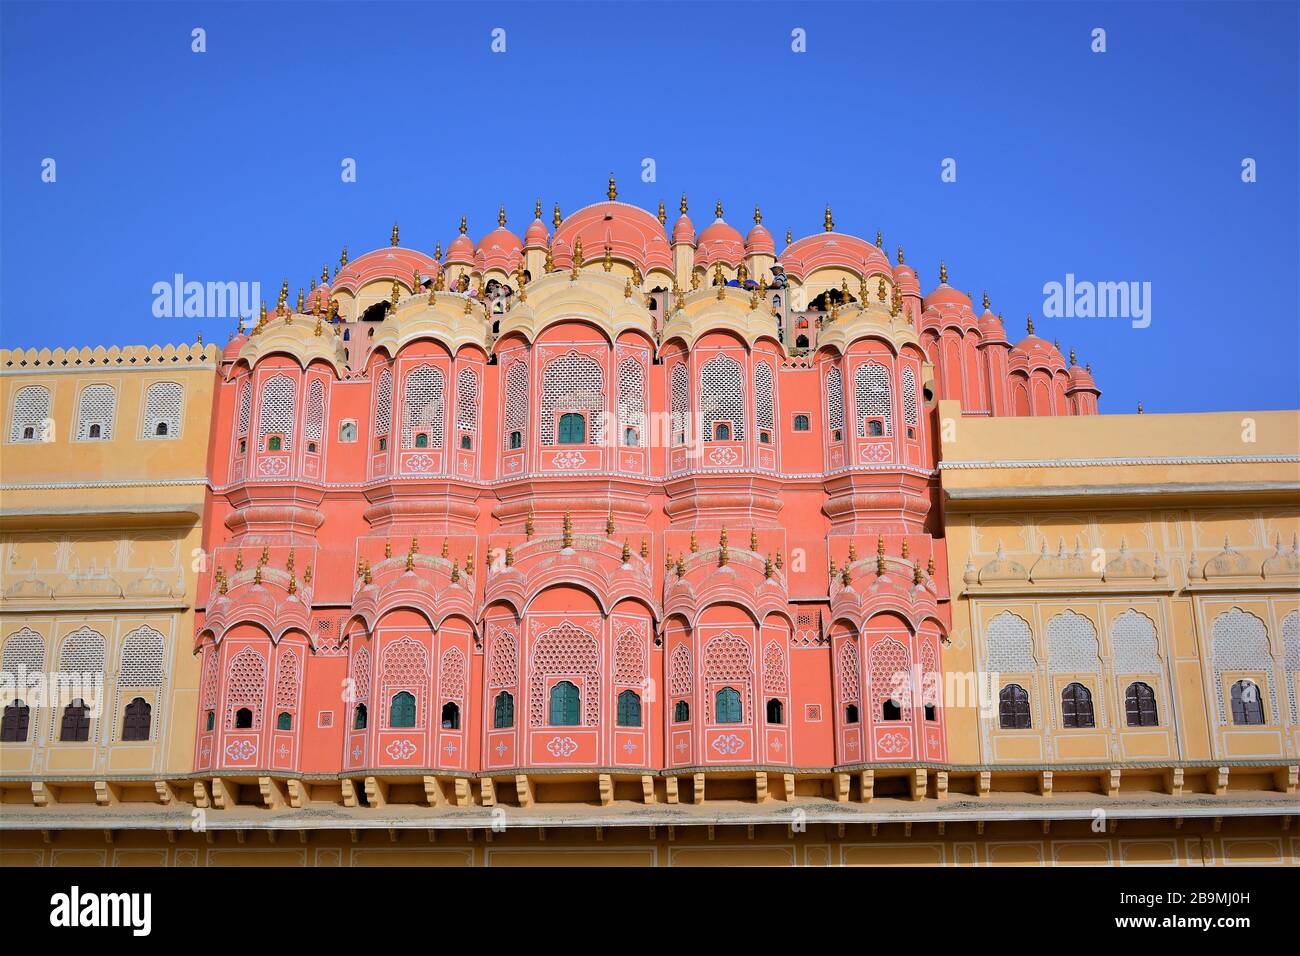 Awesome view of Hawa Mahal  i.e. Palace of Winds made with red and pink sandstone, Jaipur, Rajasthan, India Stock Photo